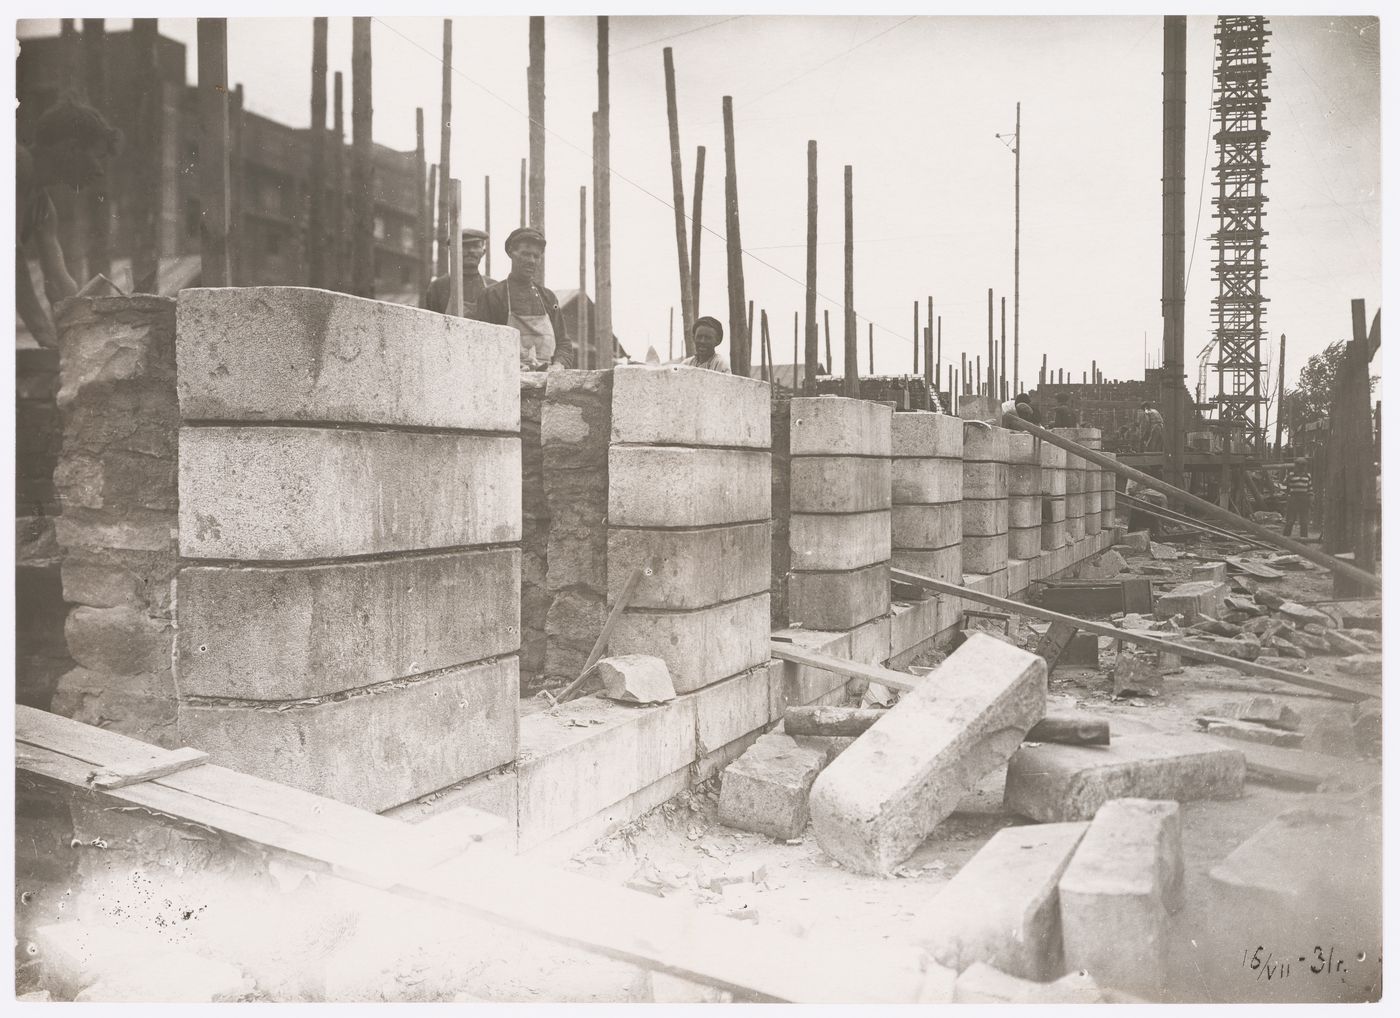 View of the Building of Industry construction site showing an exterior wall, Sverdlovsk, Soviet Union (now Ekaterinburg, Russia)